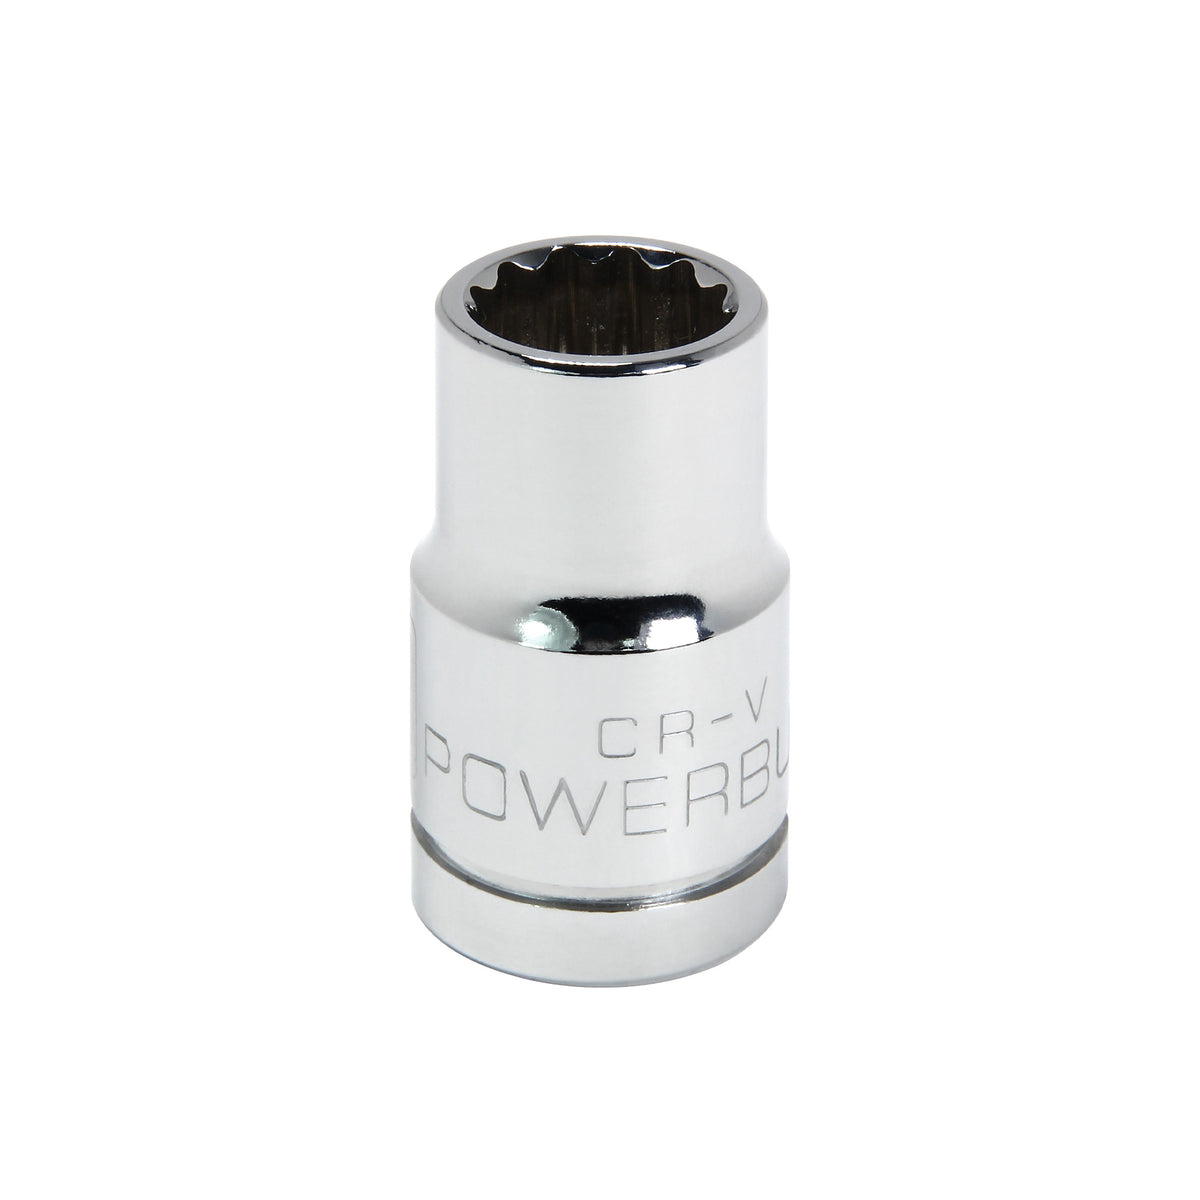 1/2 Inch Drive x 1/2 Inch 12 Point Shallow Socket